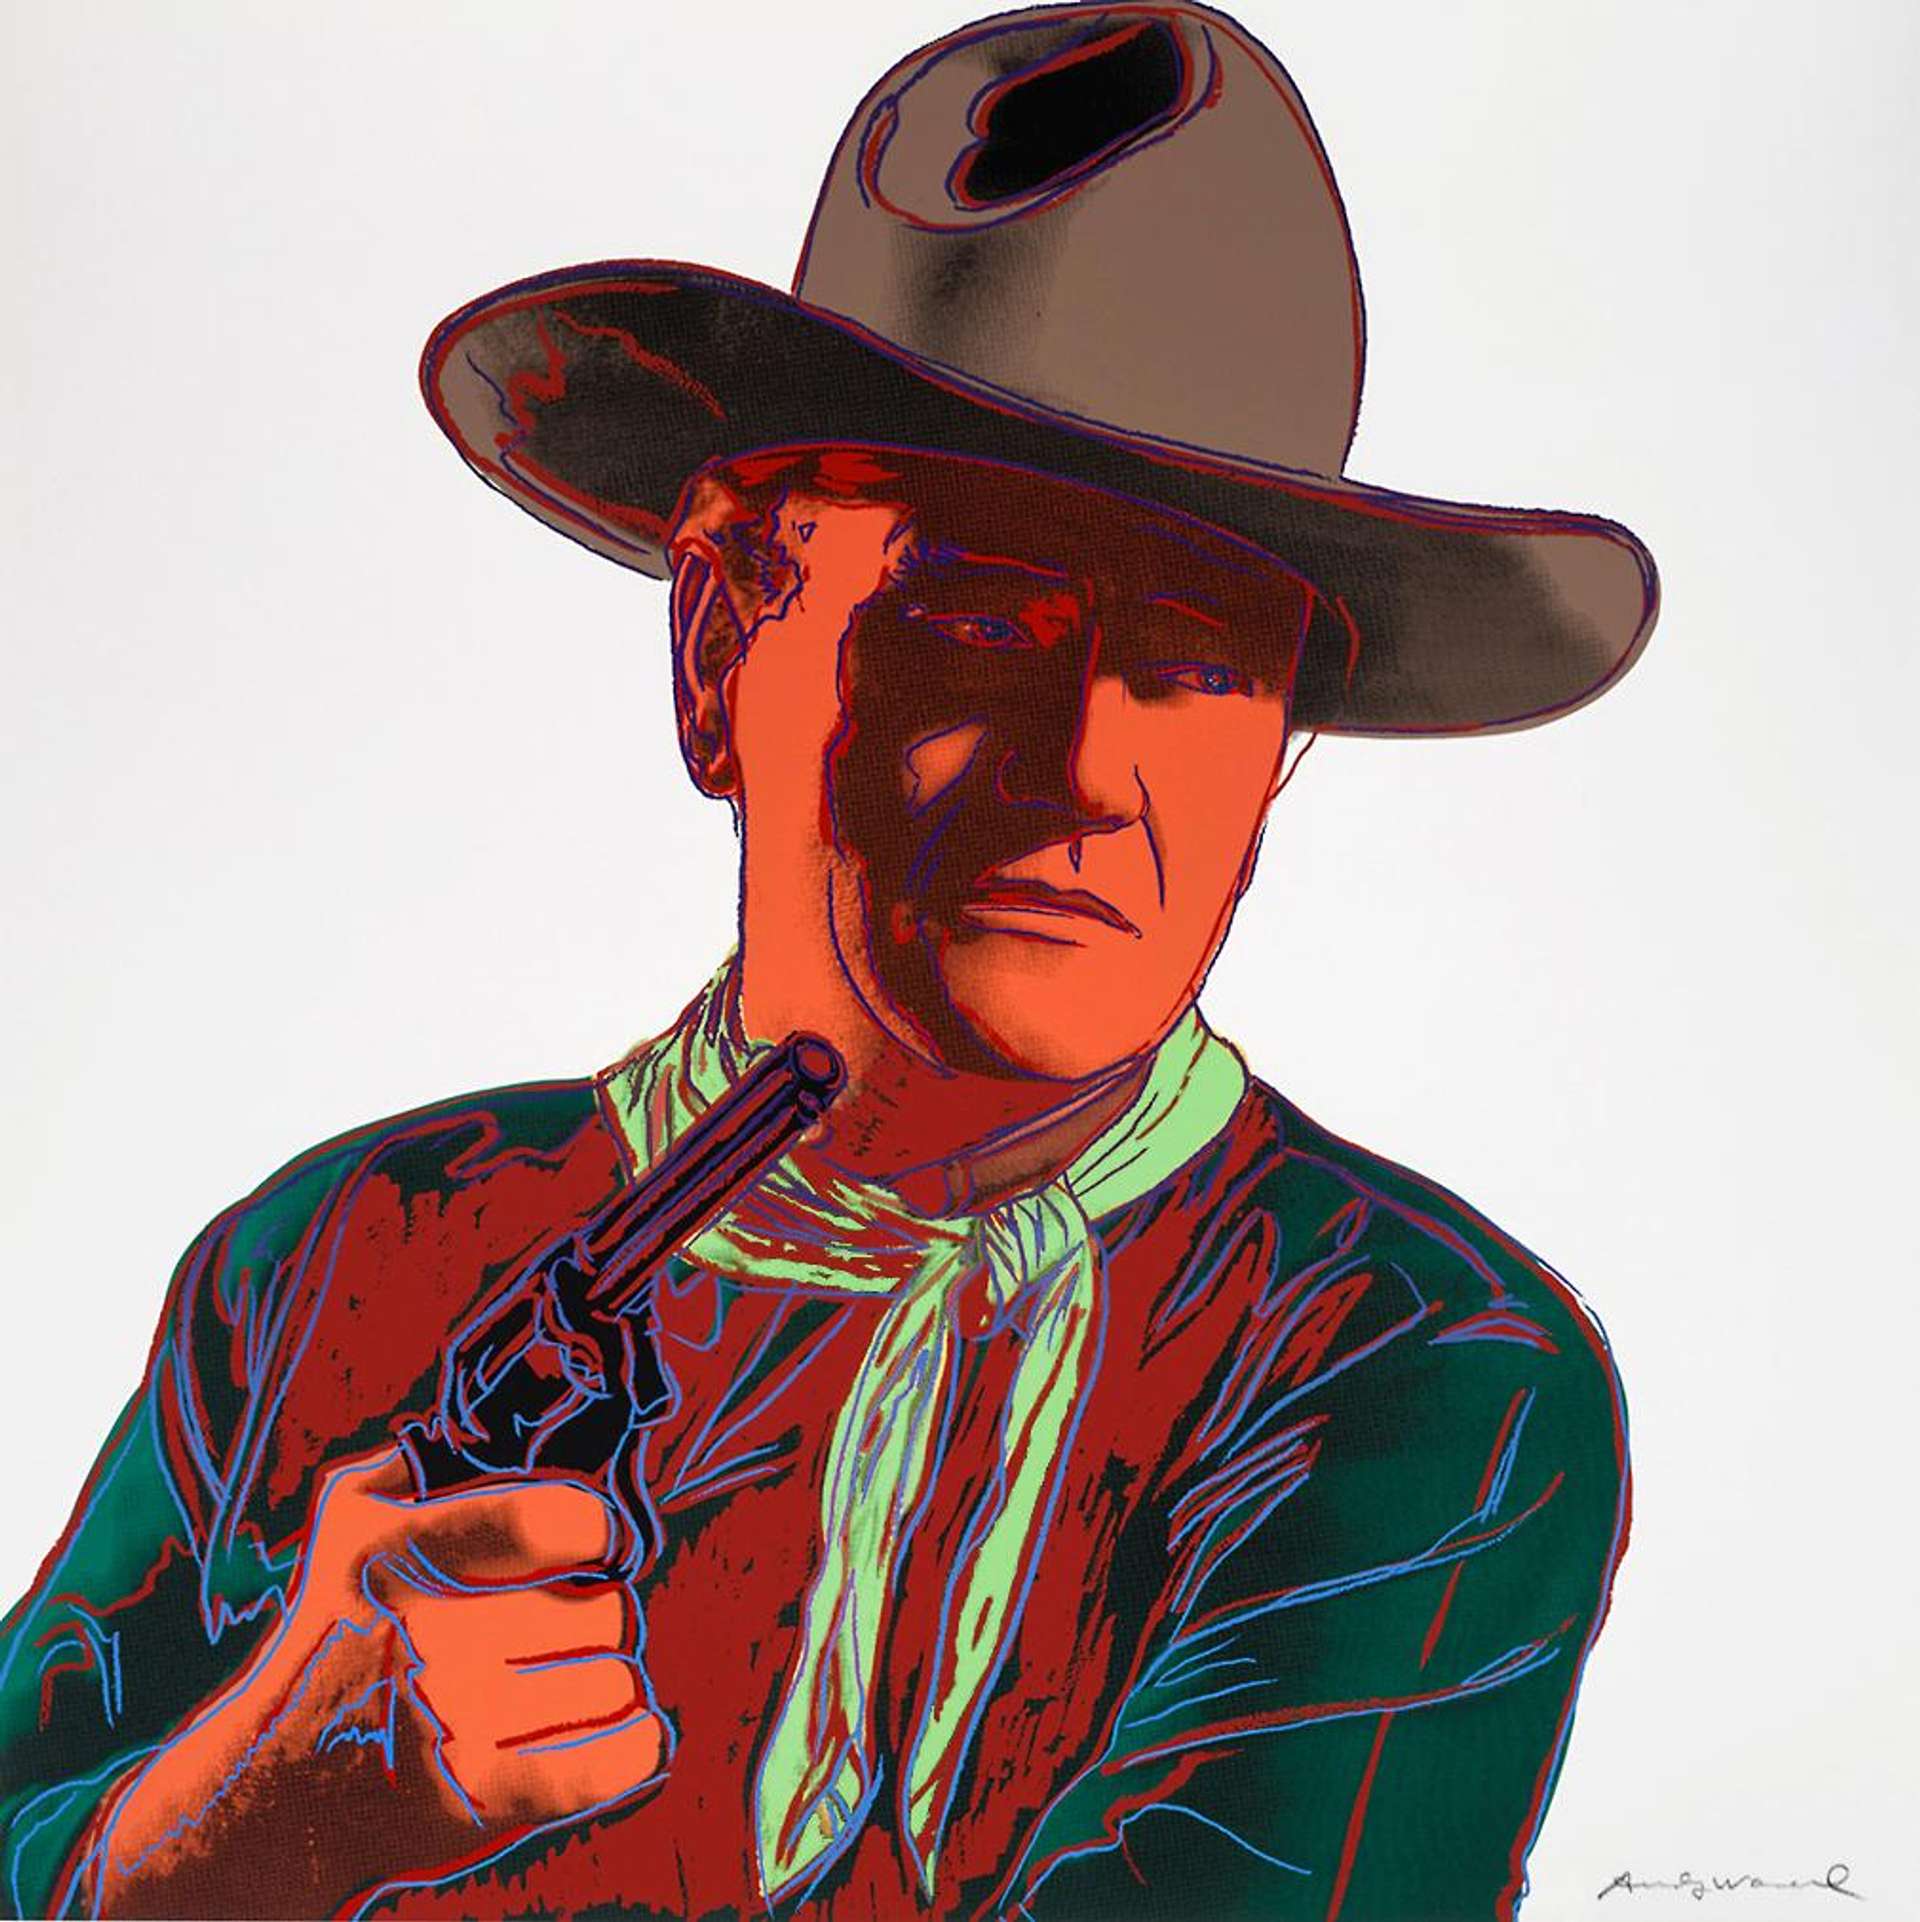 A screenprint by Andy Warhol depicting John Wayne with bright orange on the skin and green scarf. Wayne is pictured in a Stetson hat, pointing a gun to the right of the composition.